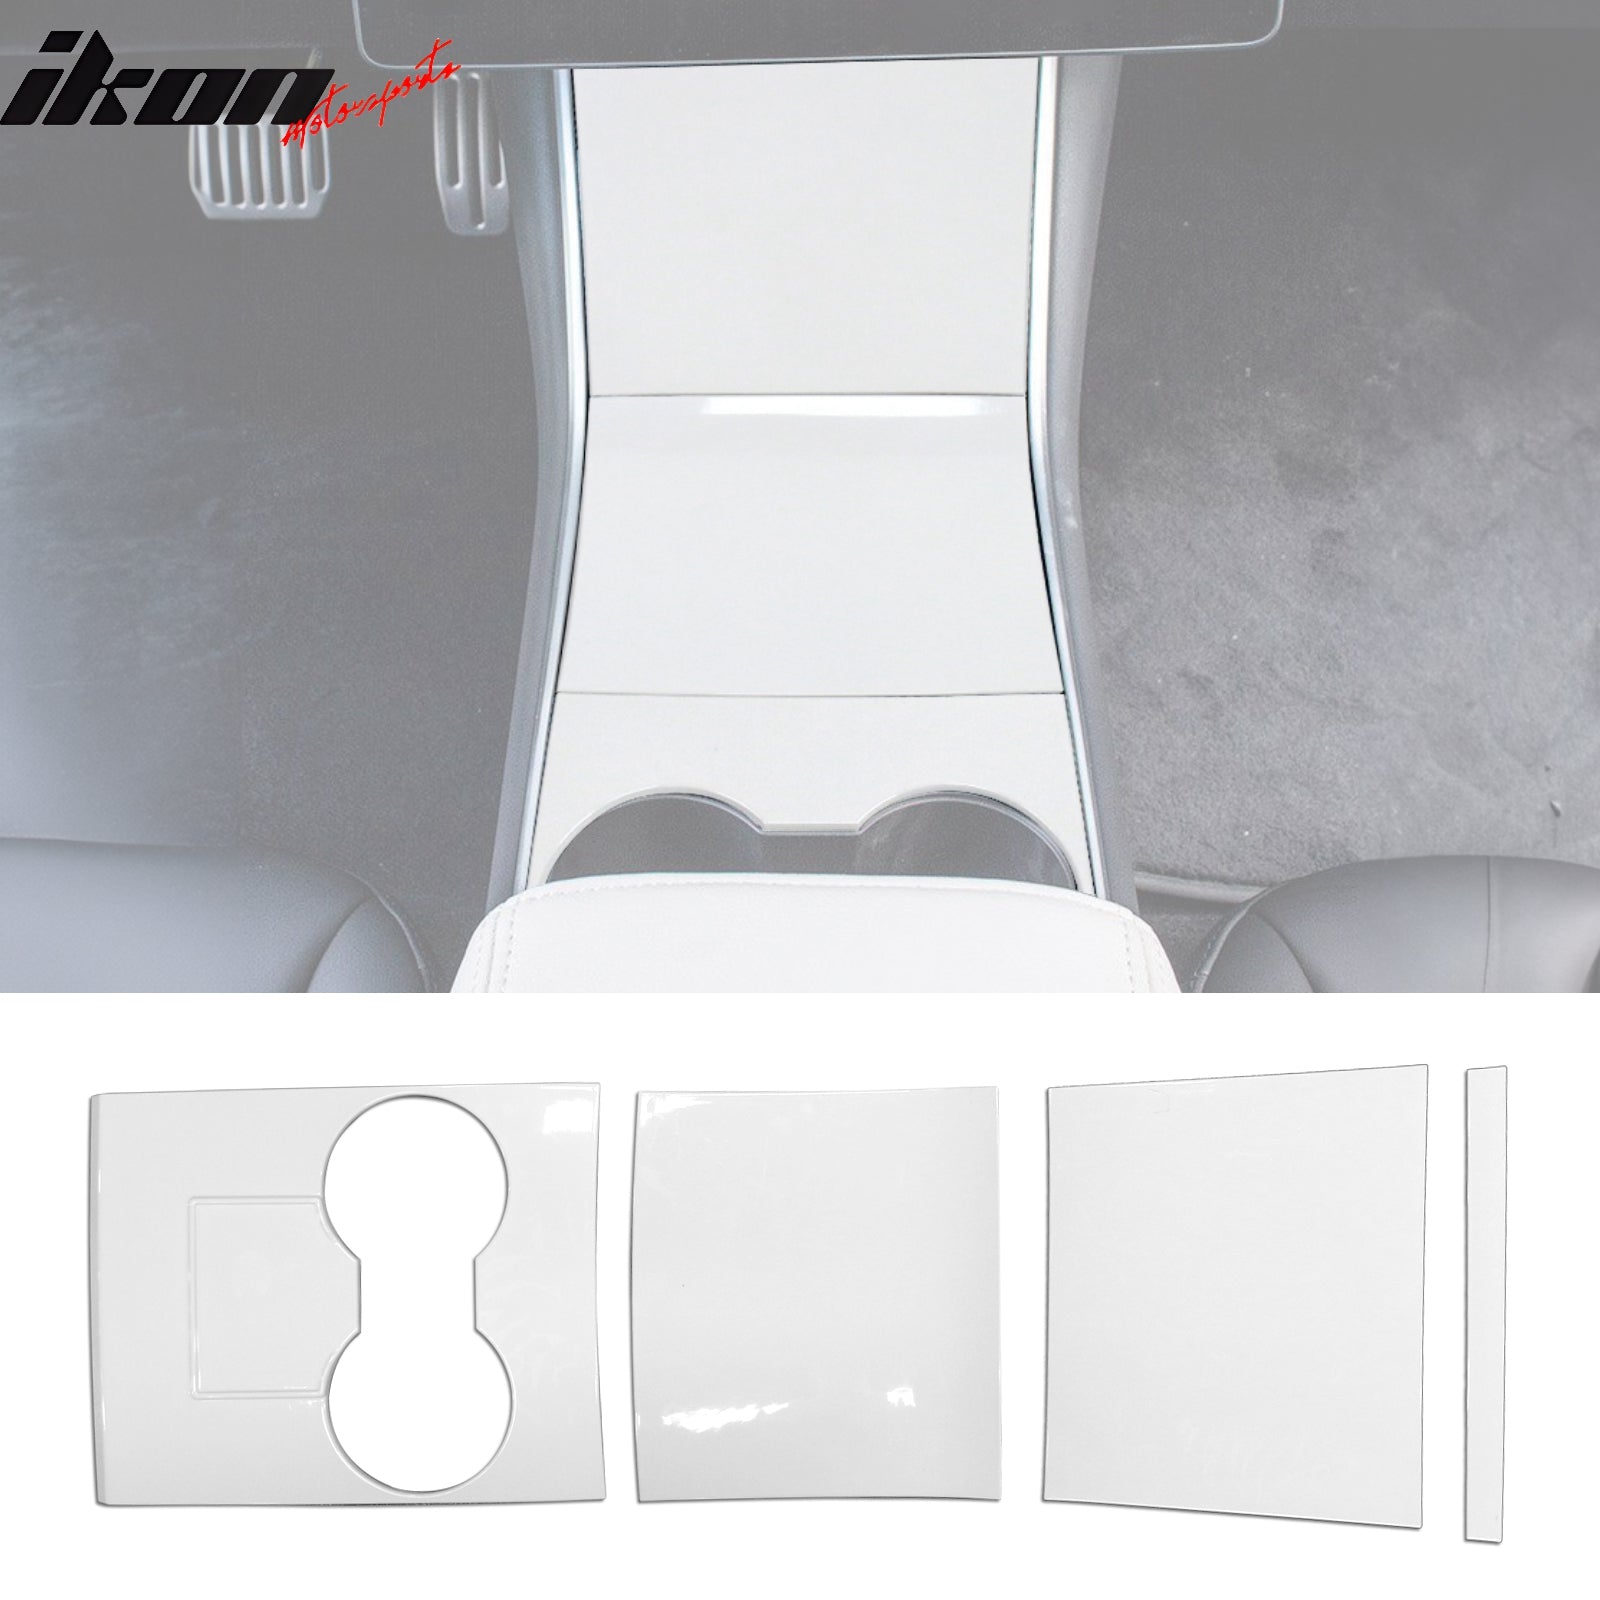 IKON MOTORSPORTS, Console Box Cover Compatible With 2017-2020 Tesla Model 3 All Models, ABS Storage Box Cover Trim 4PCS